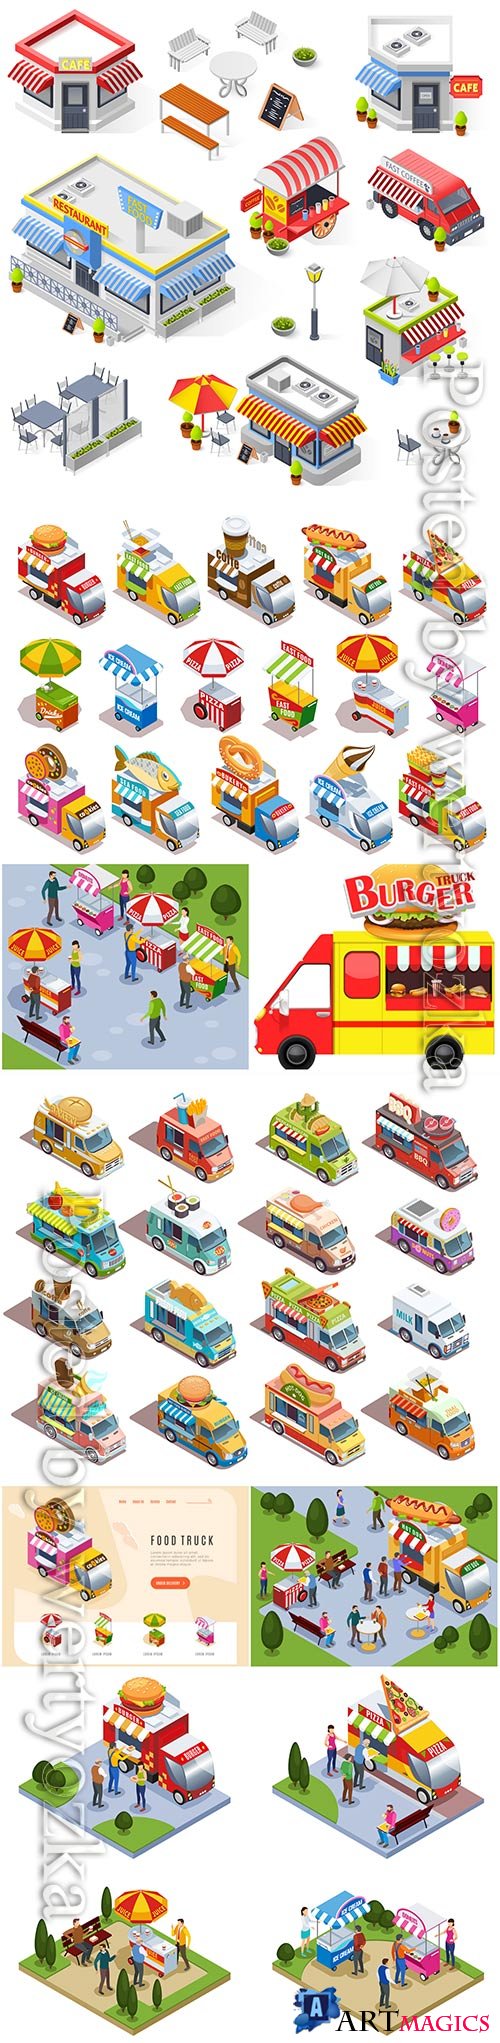 Food trucks and street carts vending fast food drinks and ice cream isometric icons set